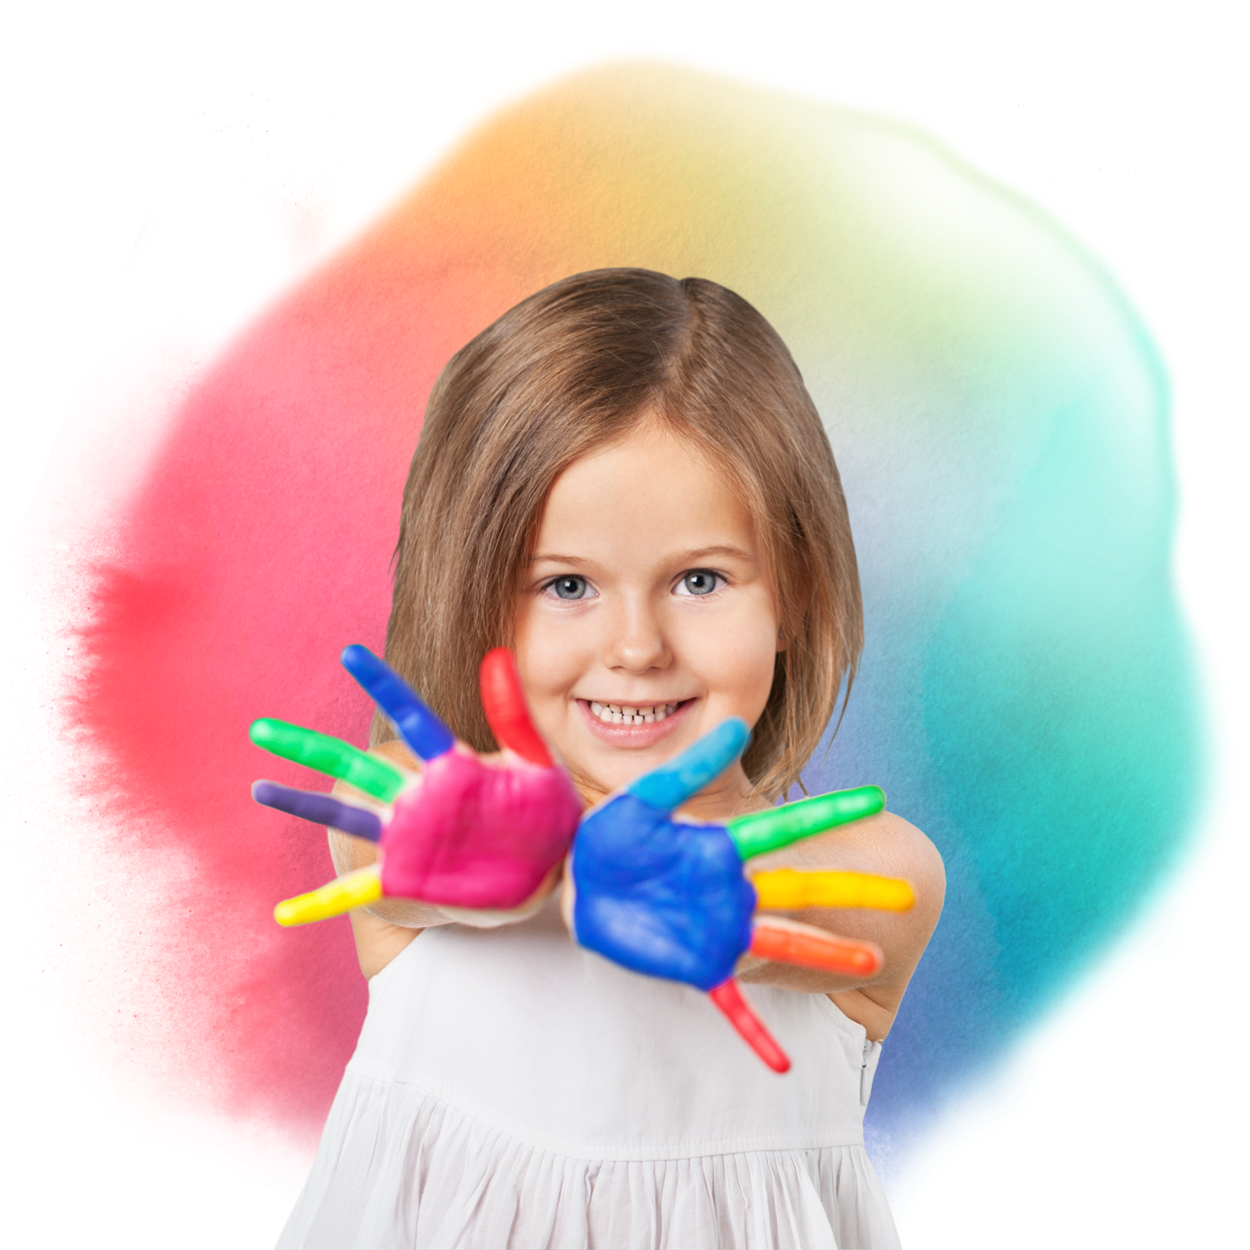 How to Paint Tcolors Finger Paint: Colors and Creative Fun!